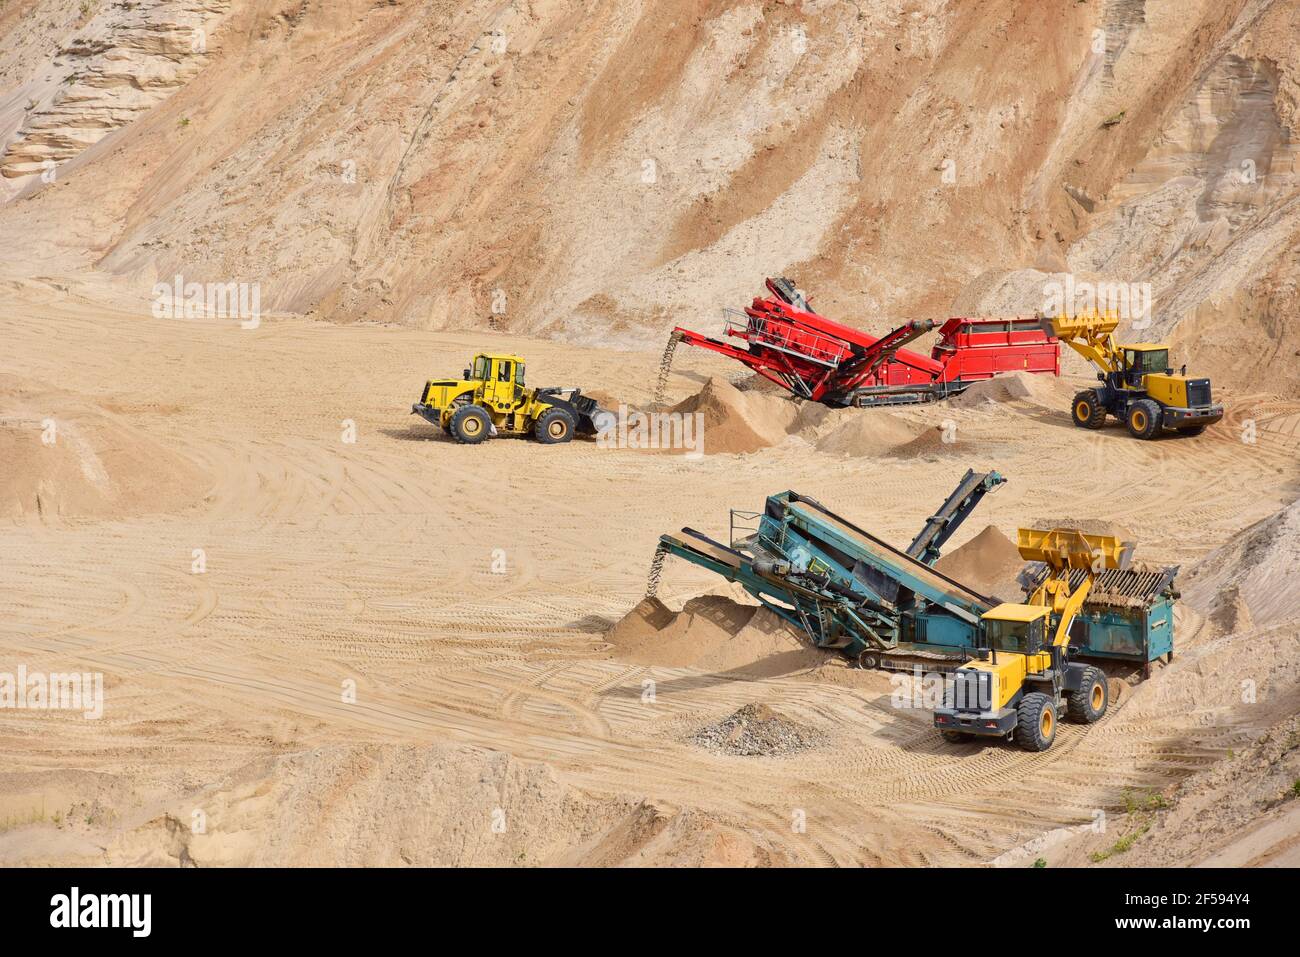 Wheel front-end loader loads sand into a dump truck. Heavy machinery in the mining quarry, excavators and trucks. Mobile jaw crusher plant with belt c Stock Photo